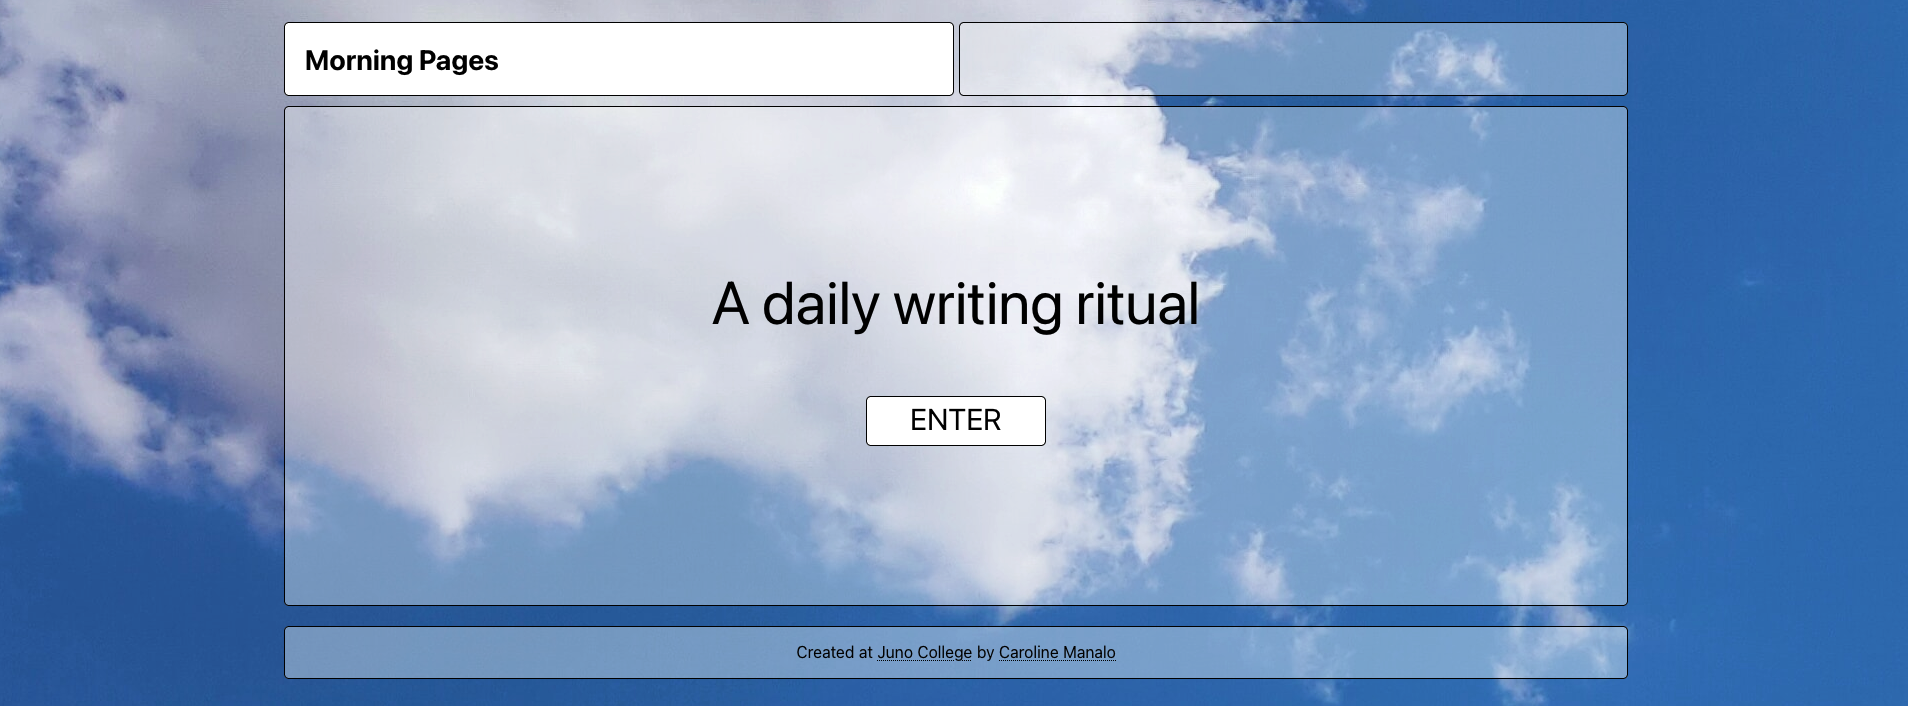 A screenshot of the Morning Pages landing page. It is a tool for writing out a stream of consciousness.